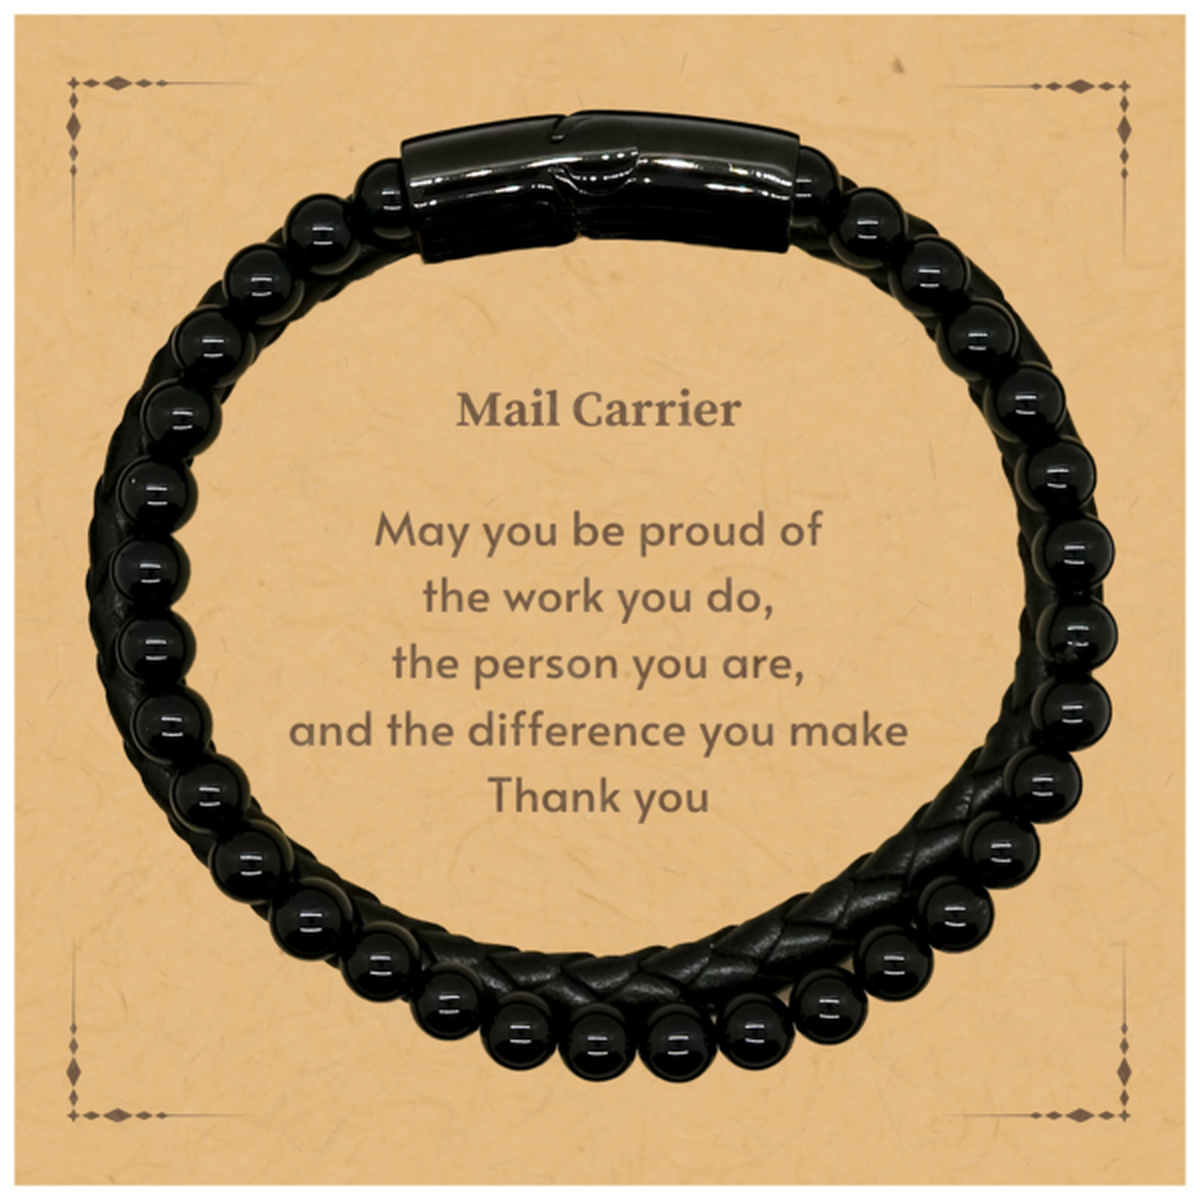 Heartwarming Stone Leather Bracelets Retirement Coworkers Gifts for Mail Carrier, Mail Carrier May You be proud of the work you do, the person you are Gifts for Boss Men Women Friends